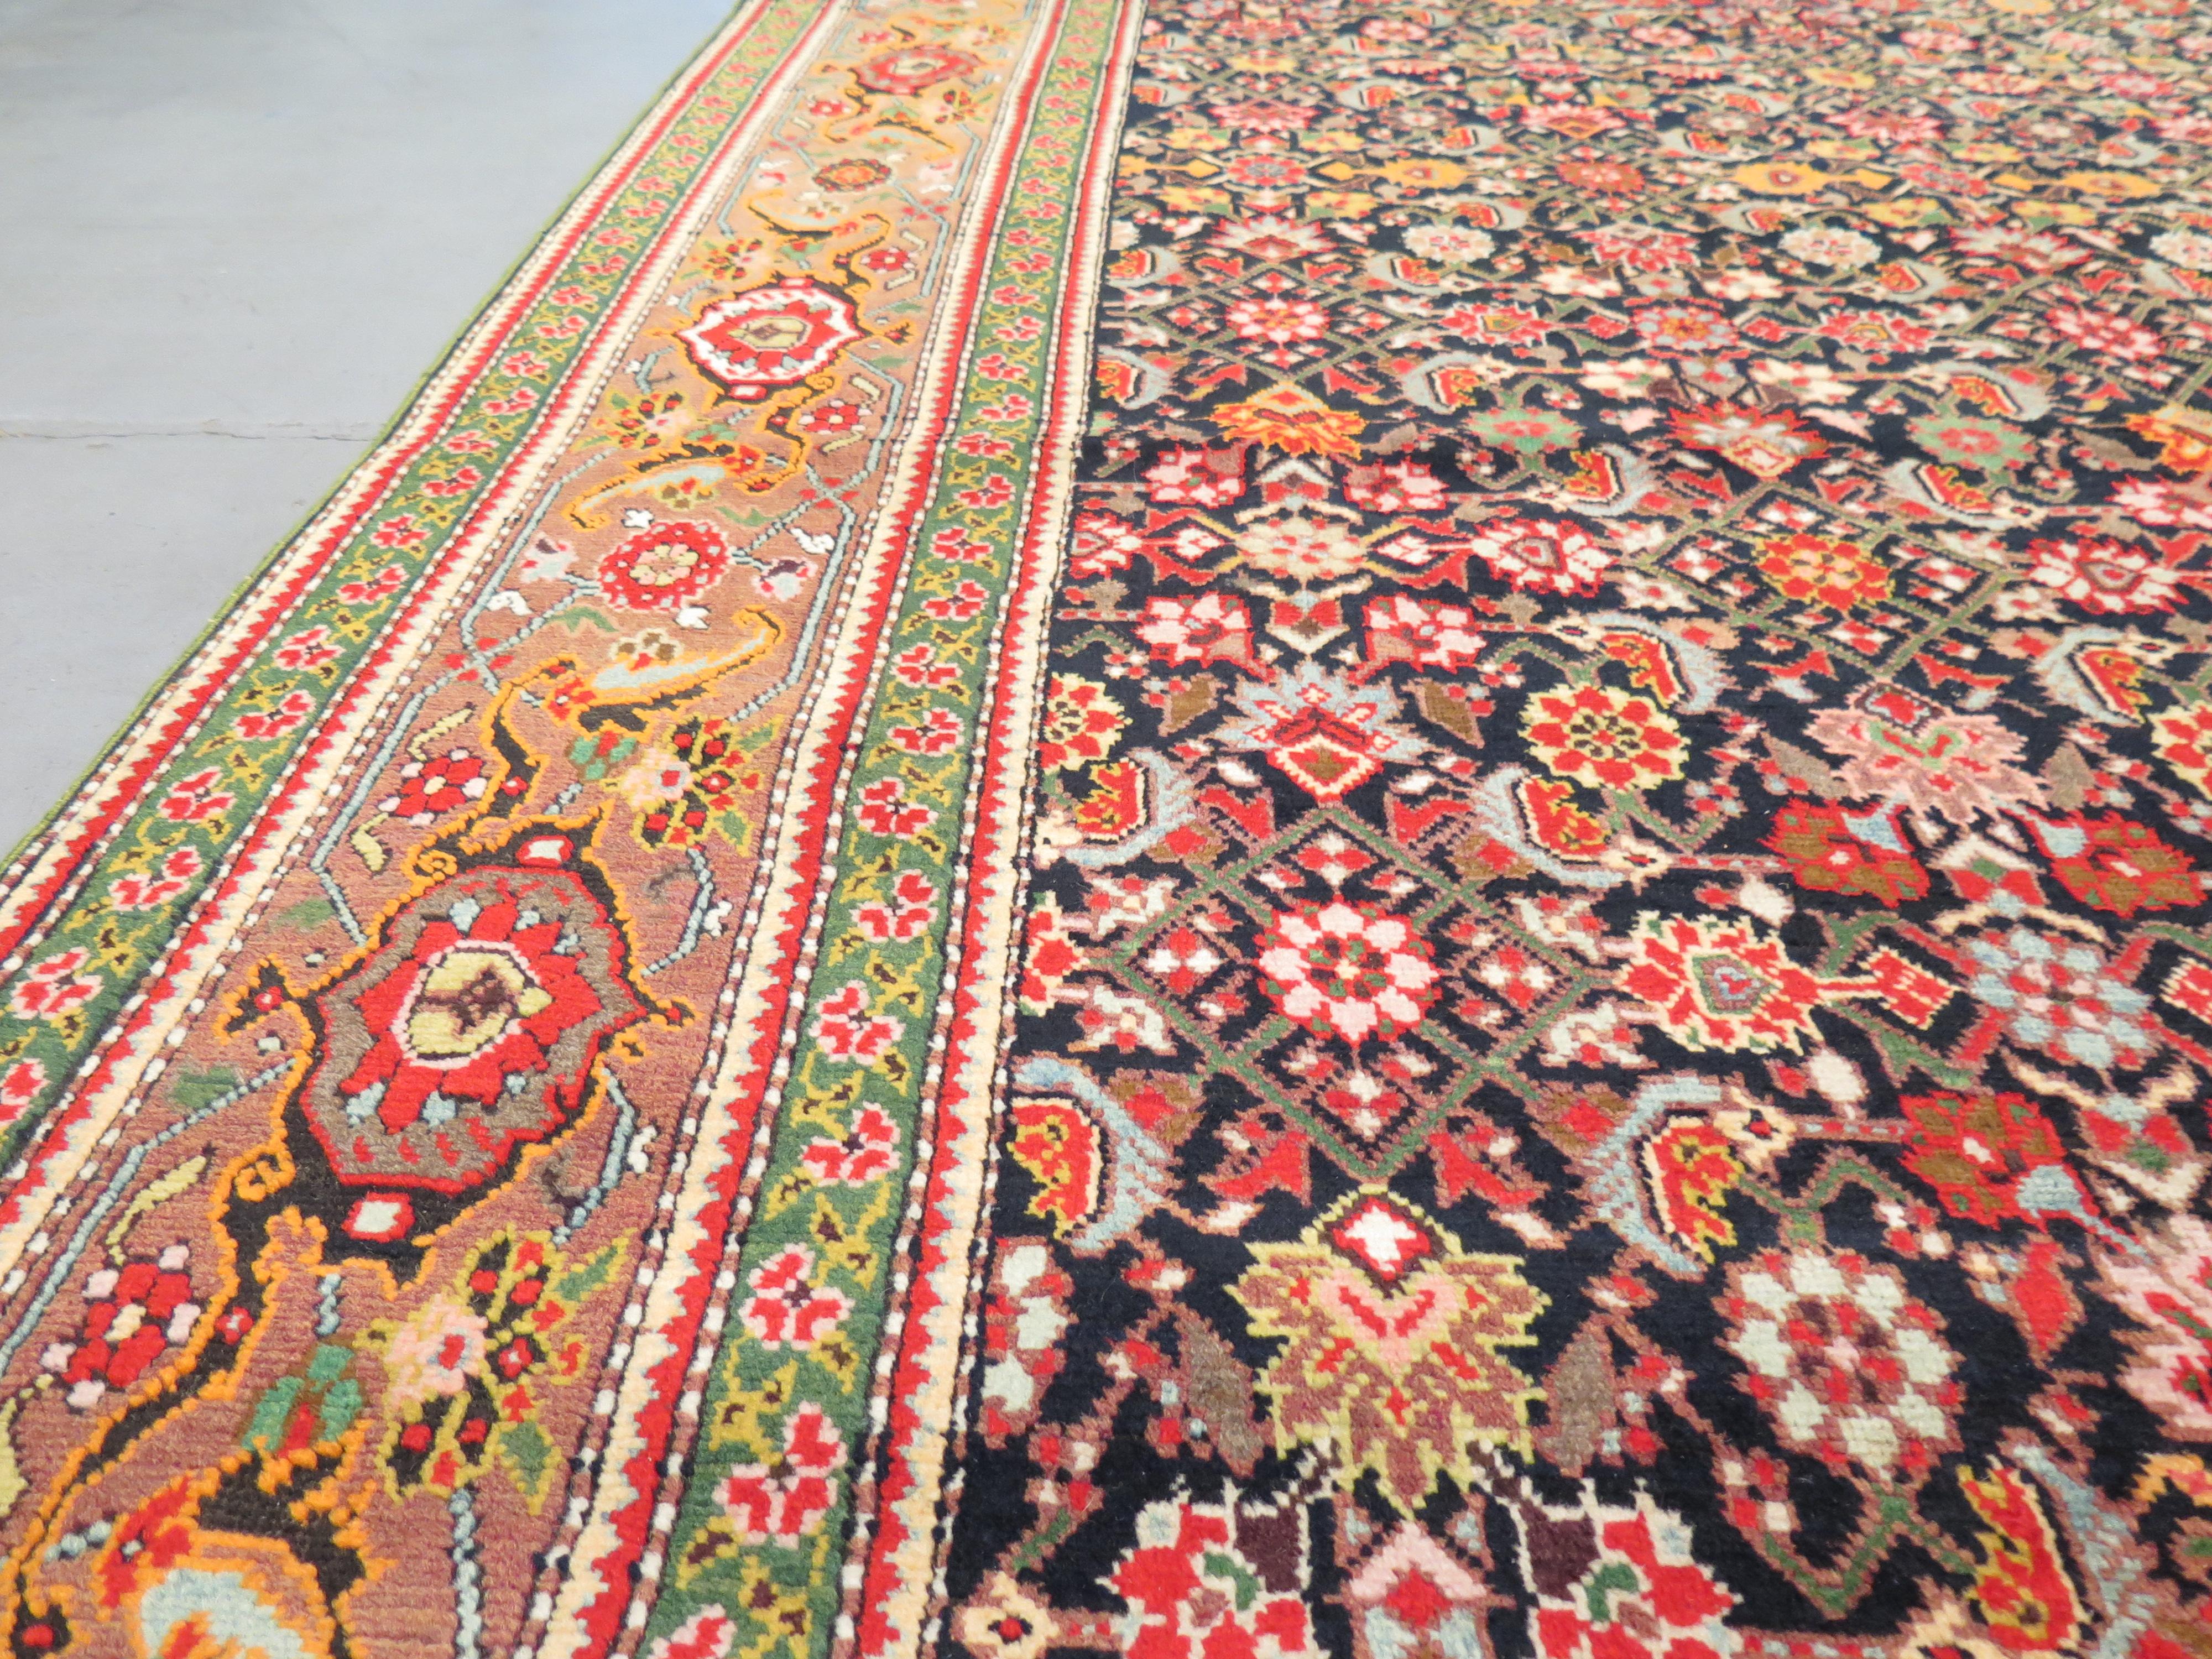 Antique Karabagh rugs are much sought after by collectors and designers as they boast some of the oldest and most varied designs of all Caucasian weavings, and represent perhaps the finest in quality and artistry amongst pieces from this